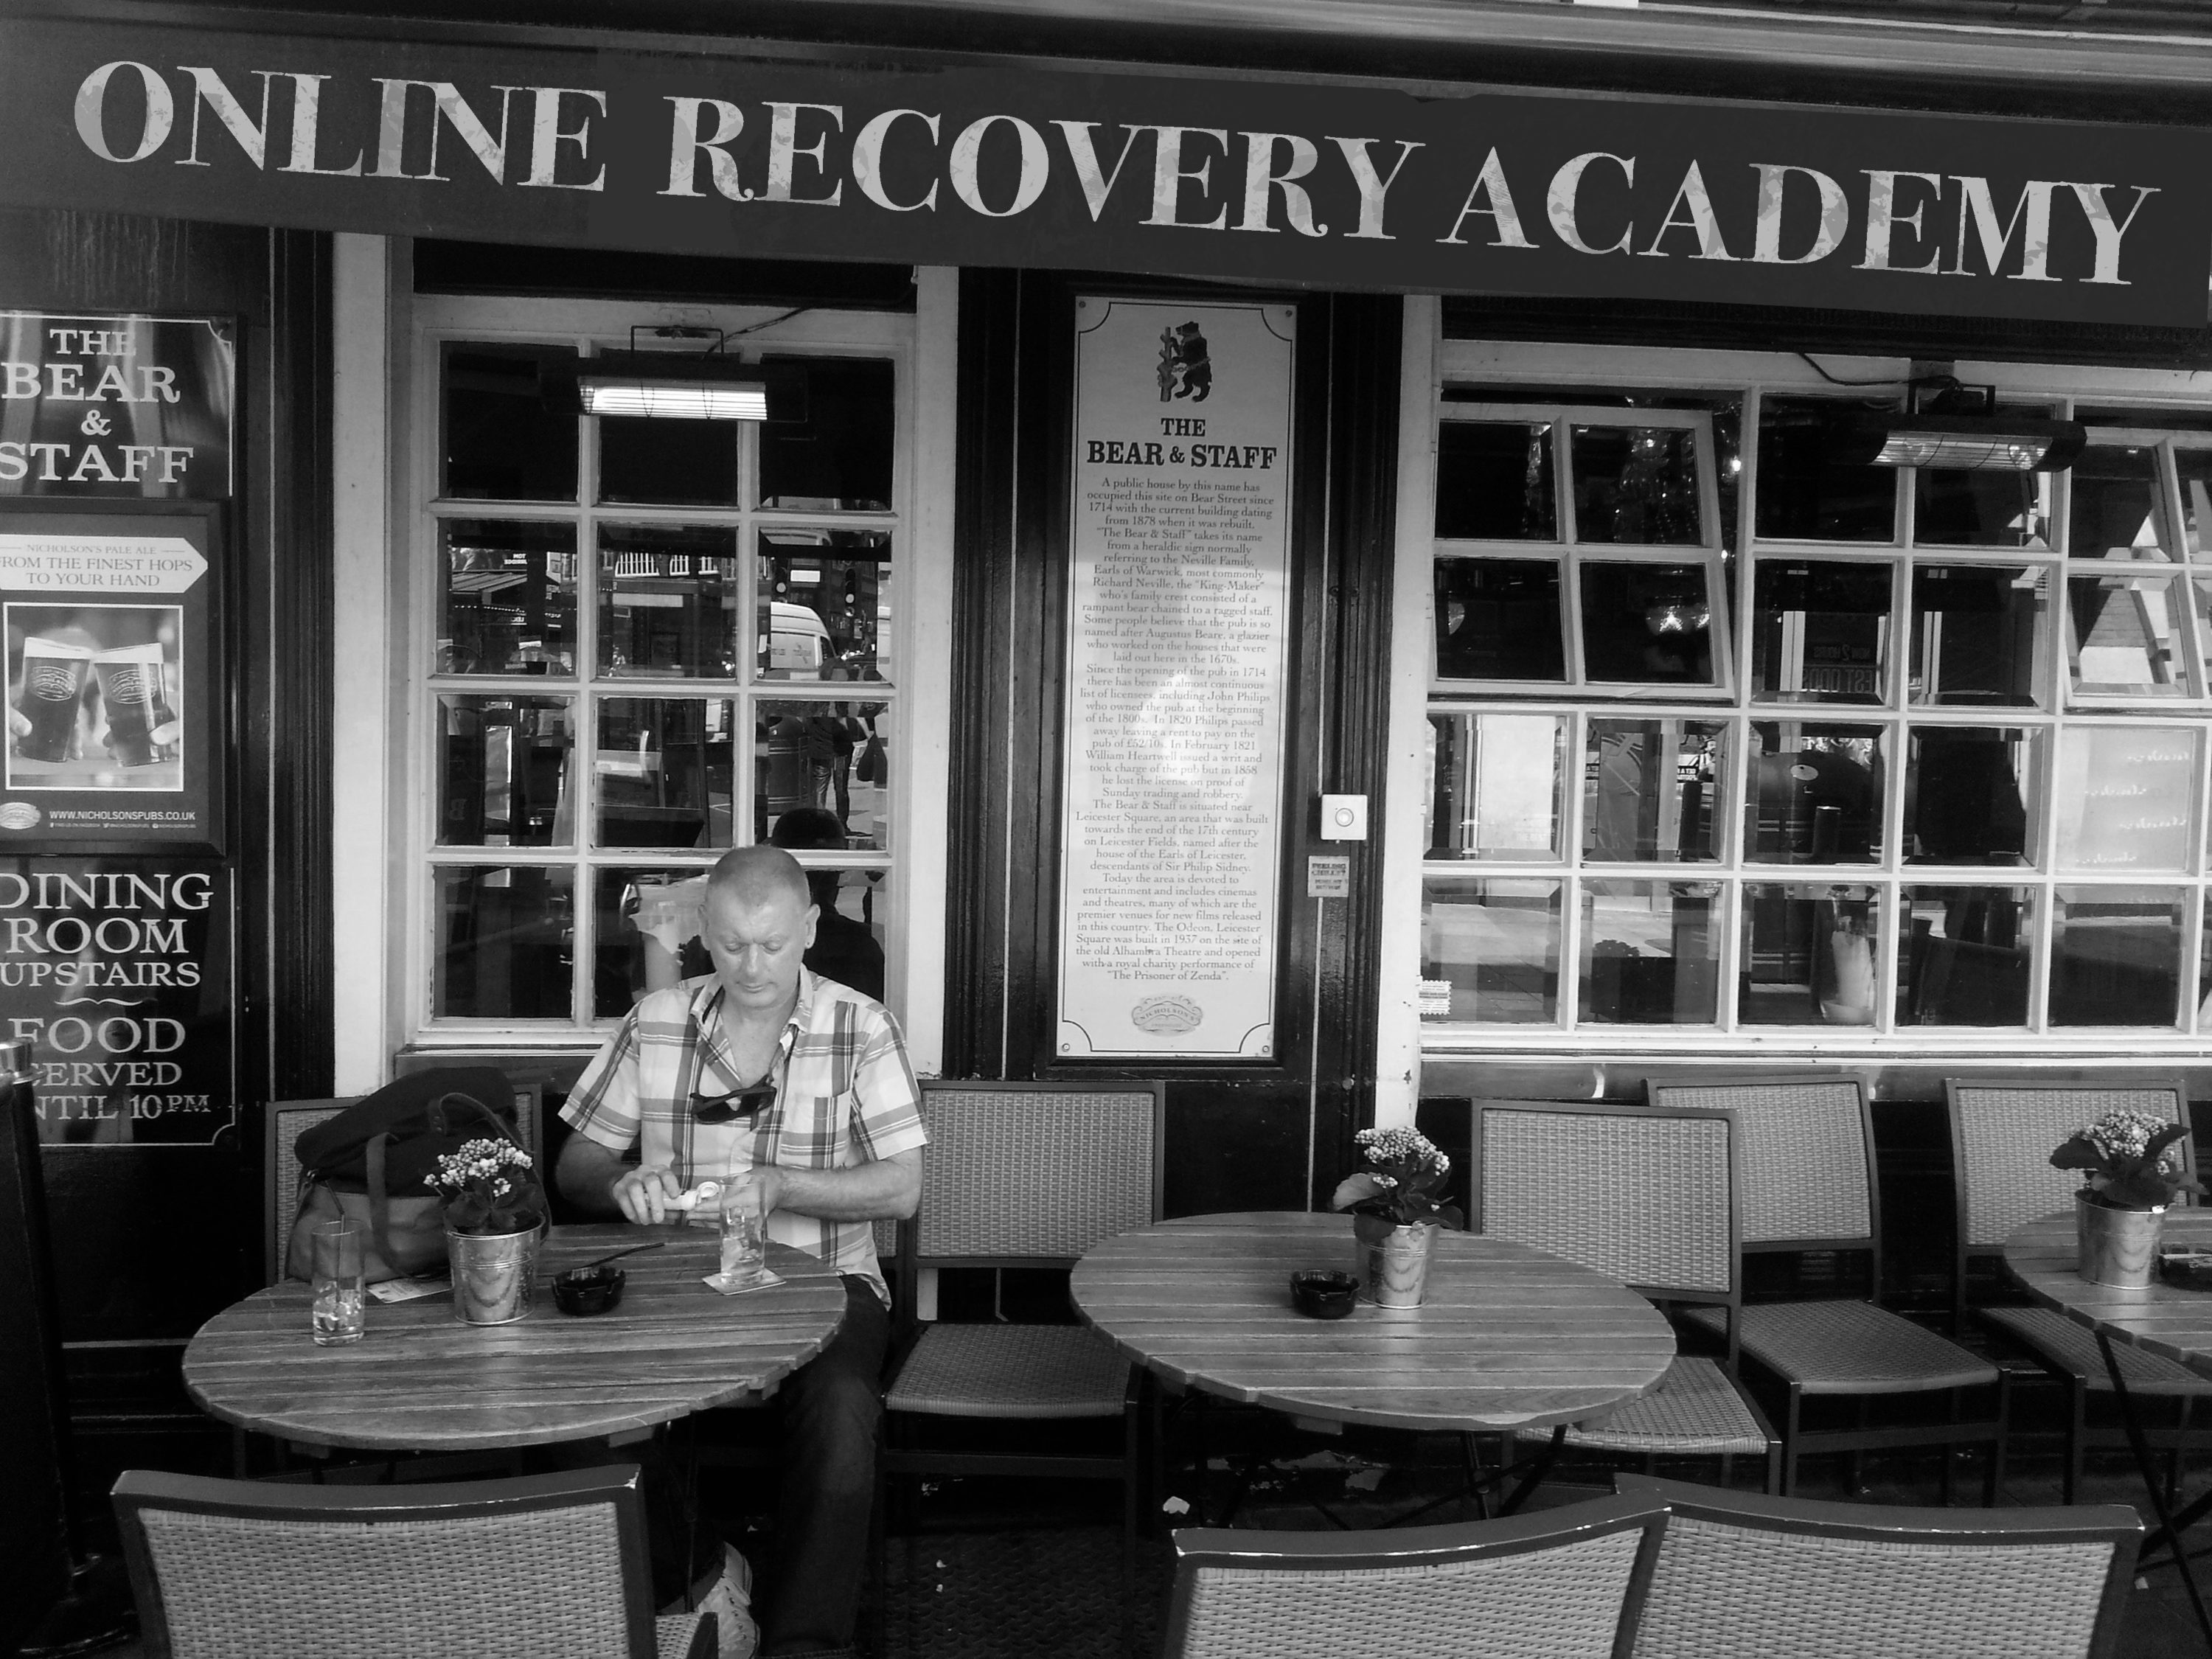 All About Recovery – How I stopped drinking and recovery started working: